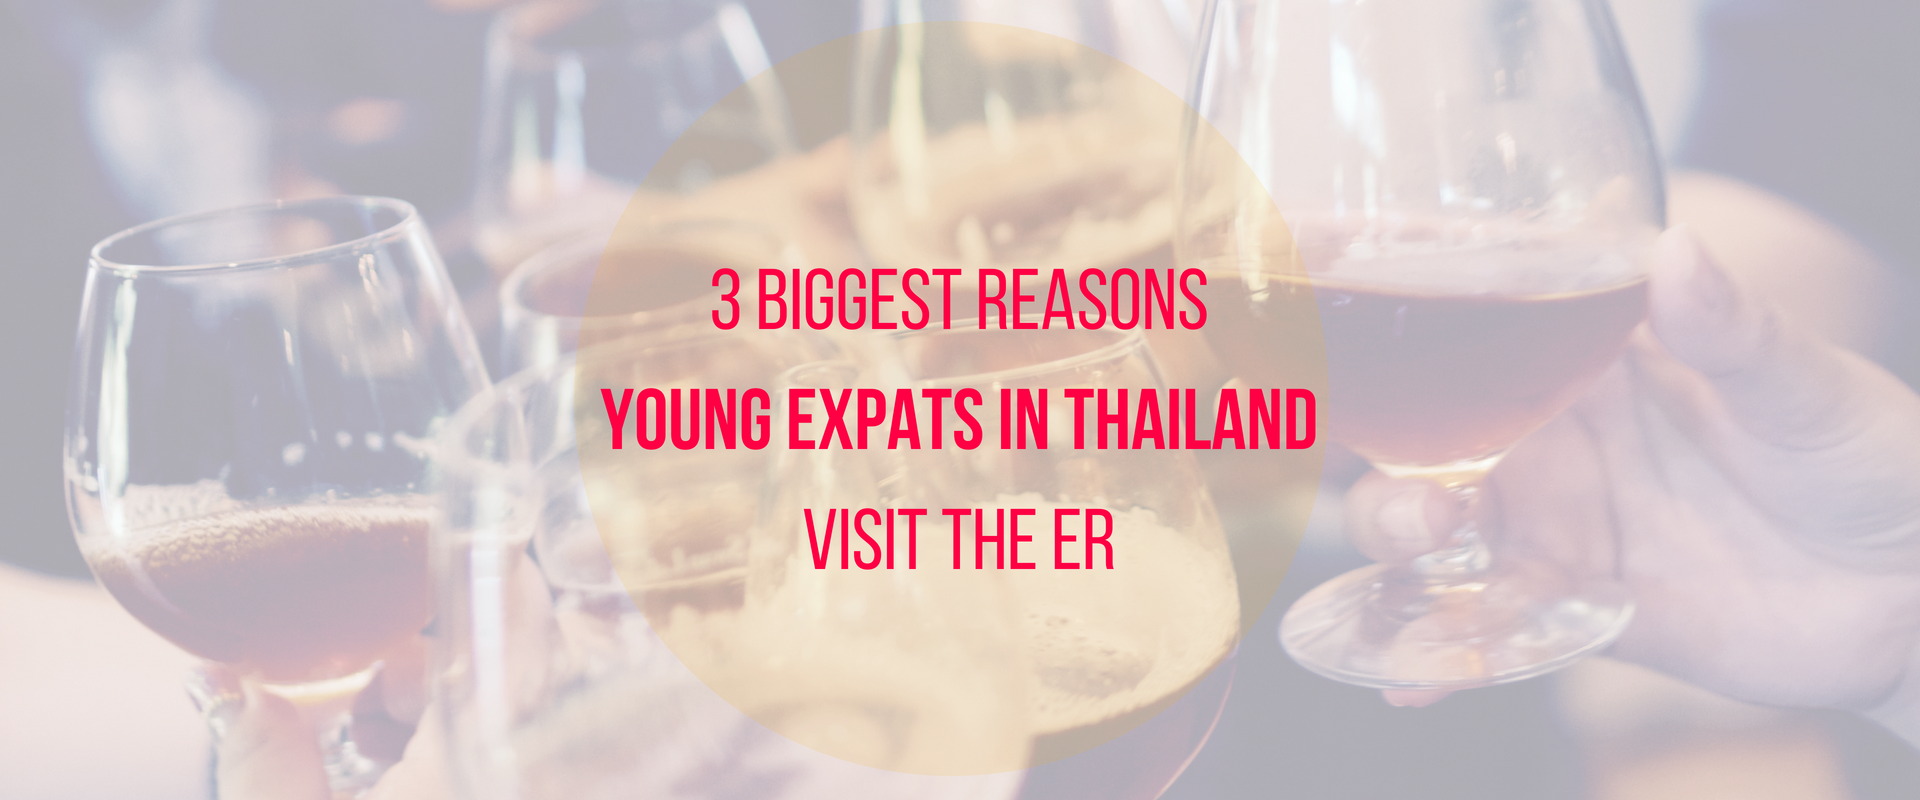 3 biggest reasons young expats in Thailand visit the ER